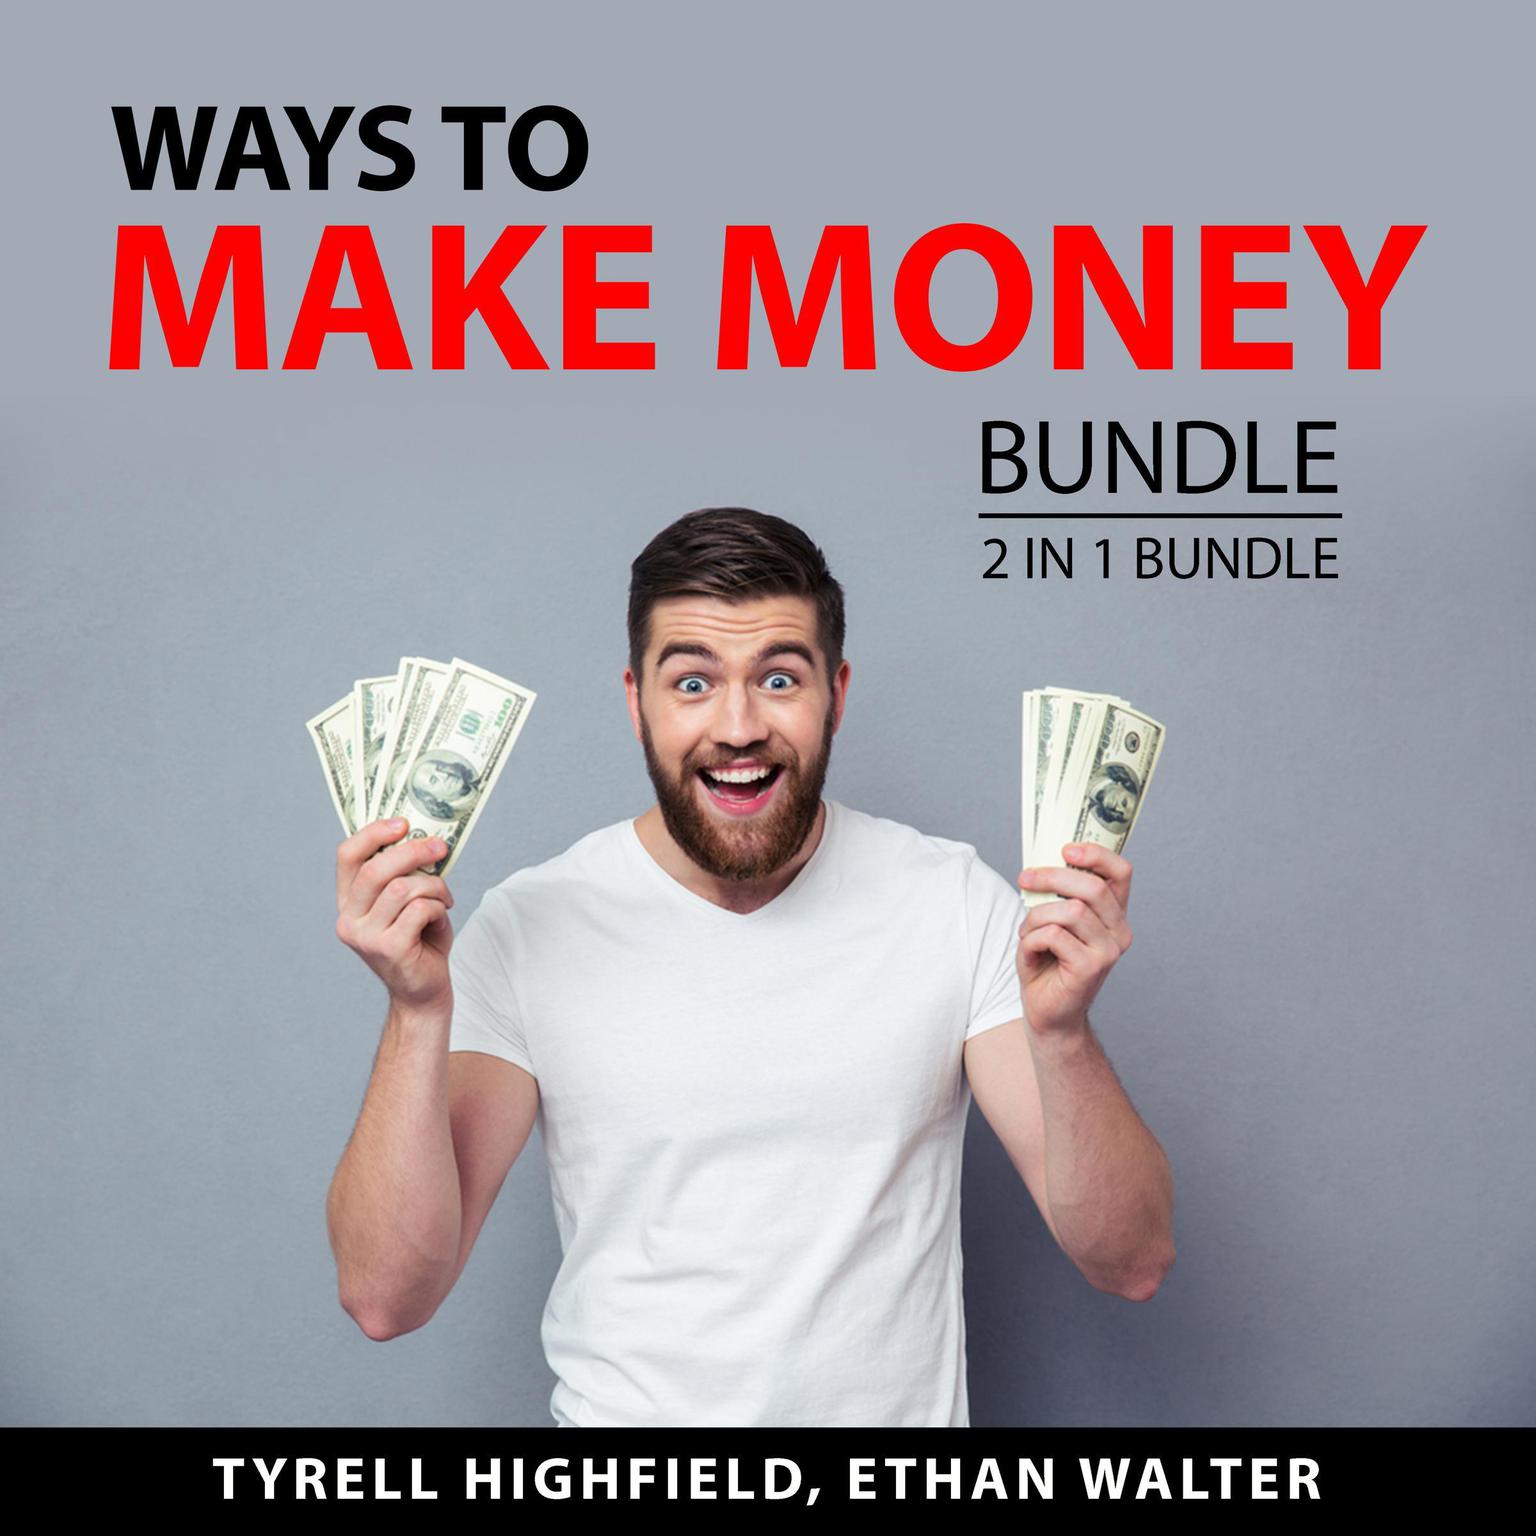 Ways to Make Money Bundle, 2 in 1 Bundle: Value-Added Selling and Make Bank Audiobook, by Ethan Walter